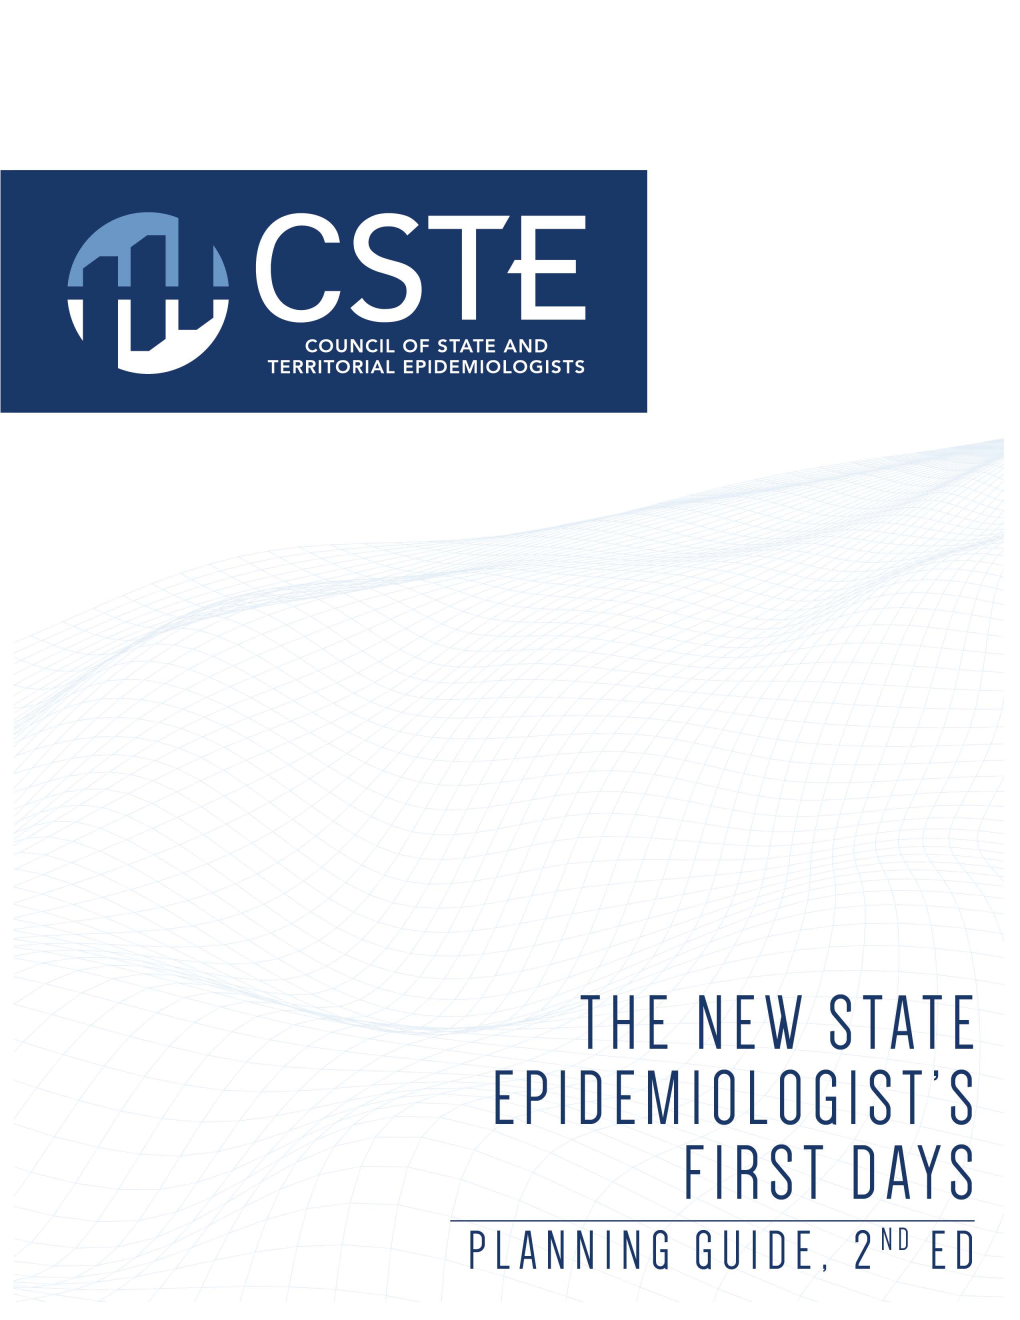 New State Epidemiologist